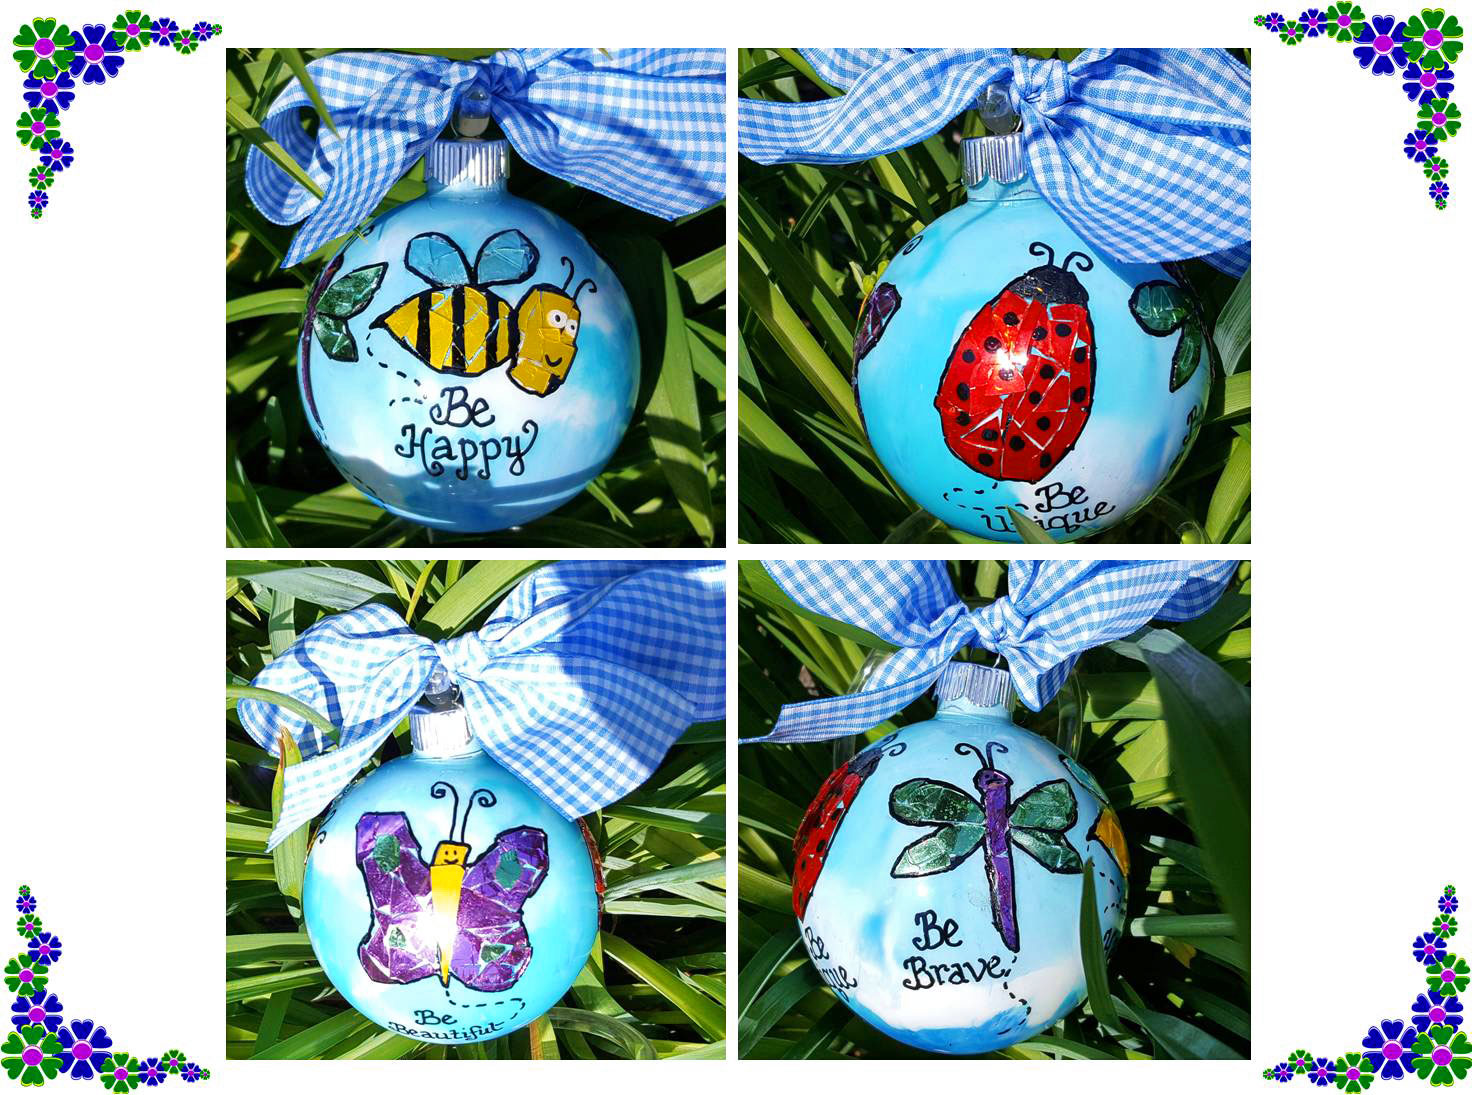 One DIY ornament displayed in 4 pictures to show each mosaic bug | OrnamentShop.com